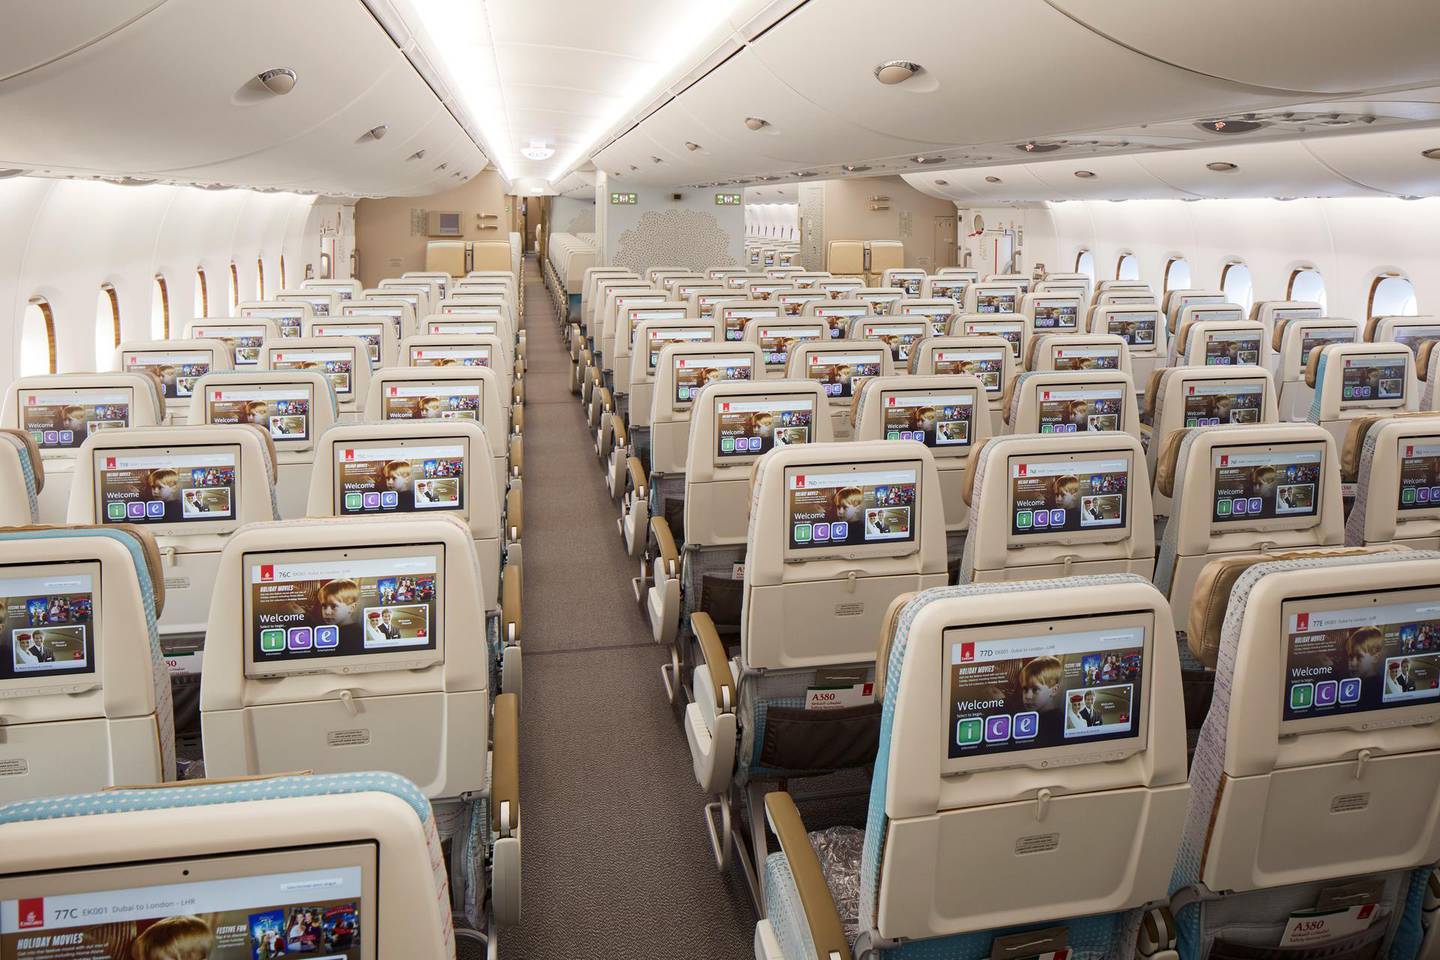 Emirates' Premium Economy seats come with the largest entertainment screens in the class of travel, but the airline has also upgraded its Economy cabin so that all passengers have a 13.3-inch personal screen